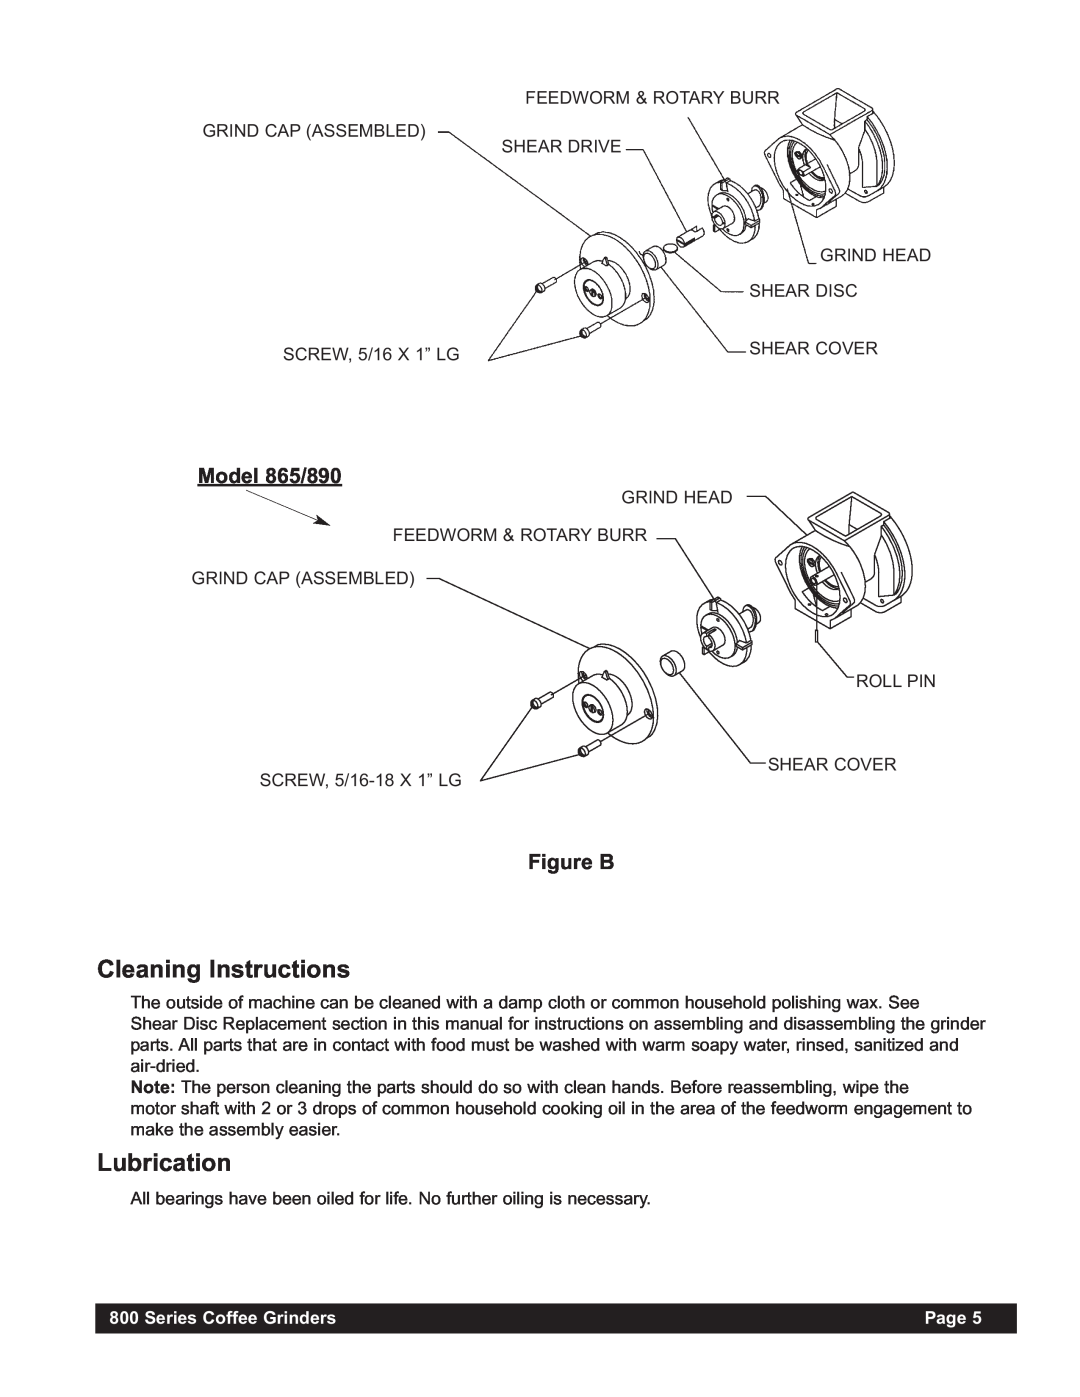 Grindmaster instruction manual Cleaning Instructions, Lubrication, Model 865/890, Figure B, Series Coffee Grinders, Page 